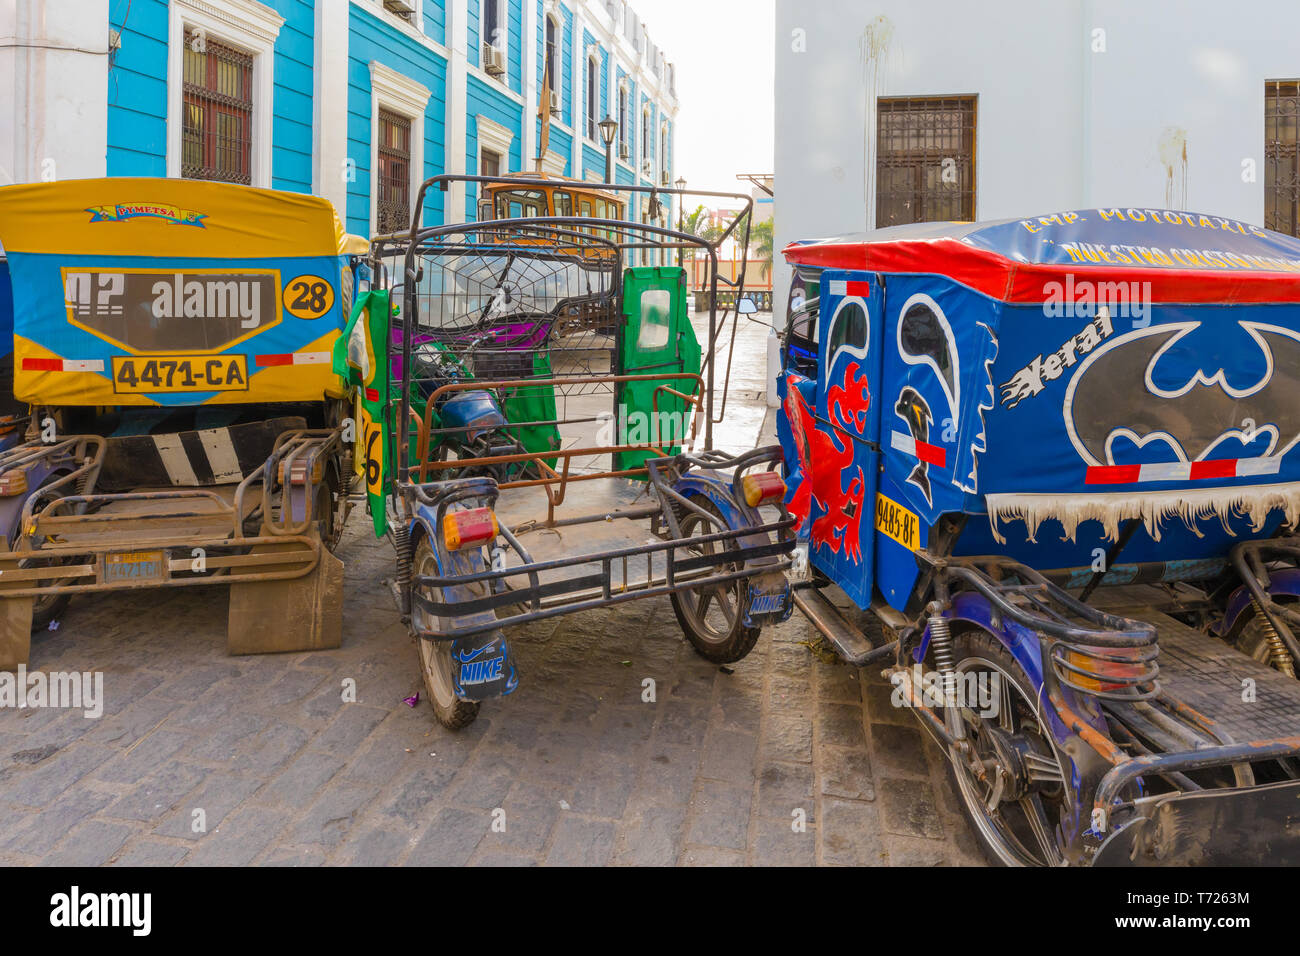 motorcycle taxis parked in Callao district Lima Peru Stock Photo